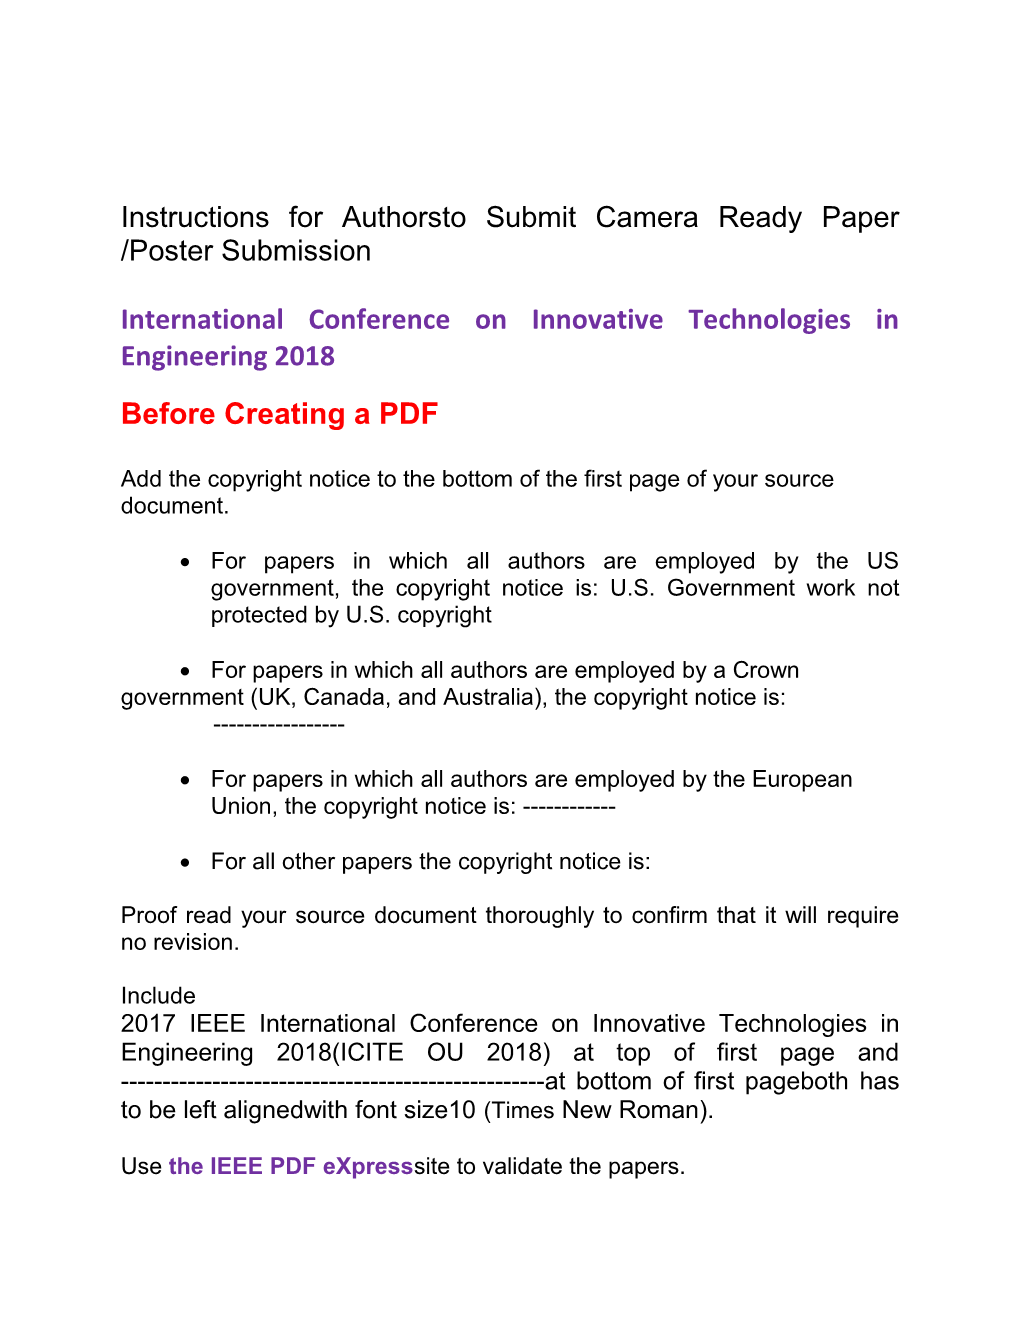 Instructions for Authorsto Submit Camera Ready Paper /Poster Submission